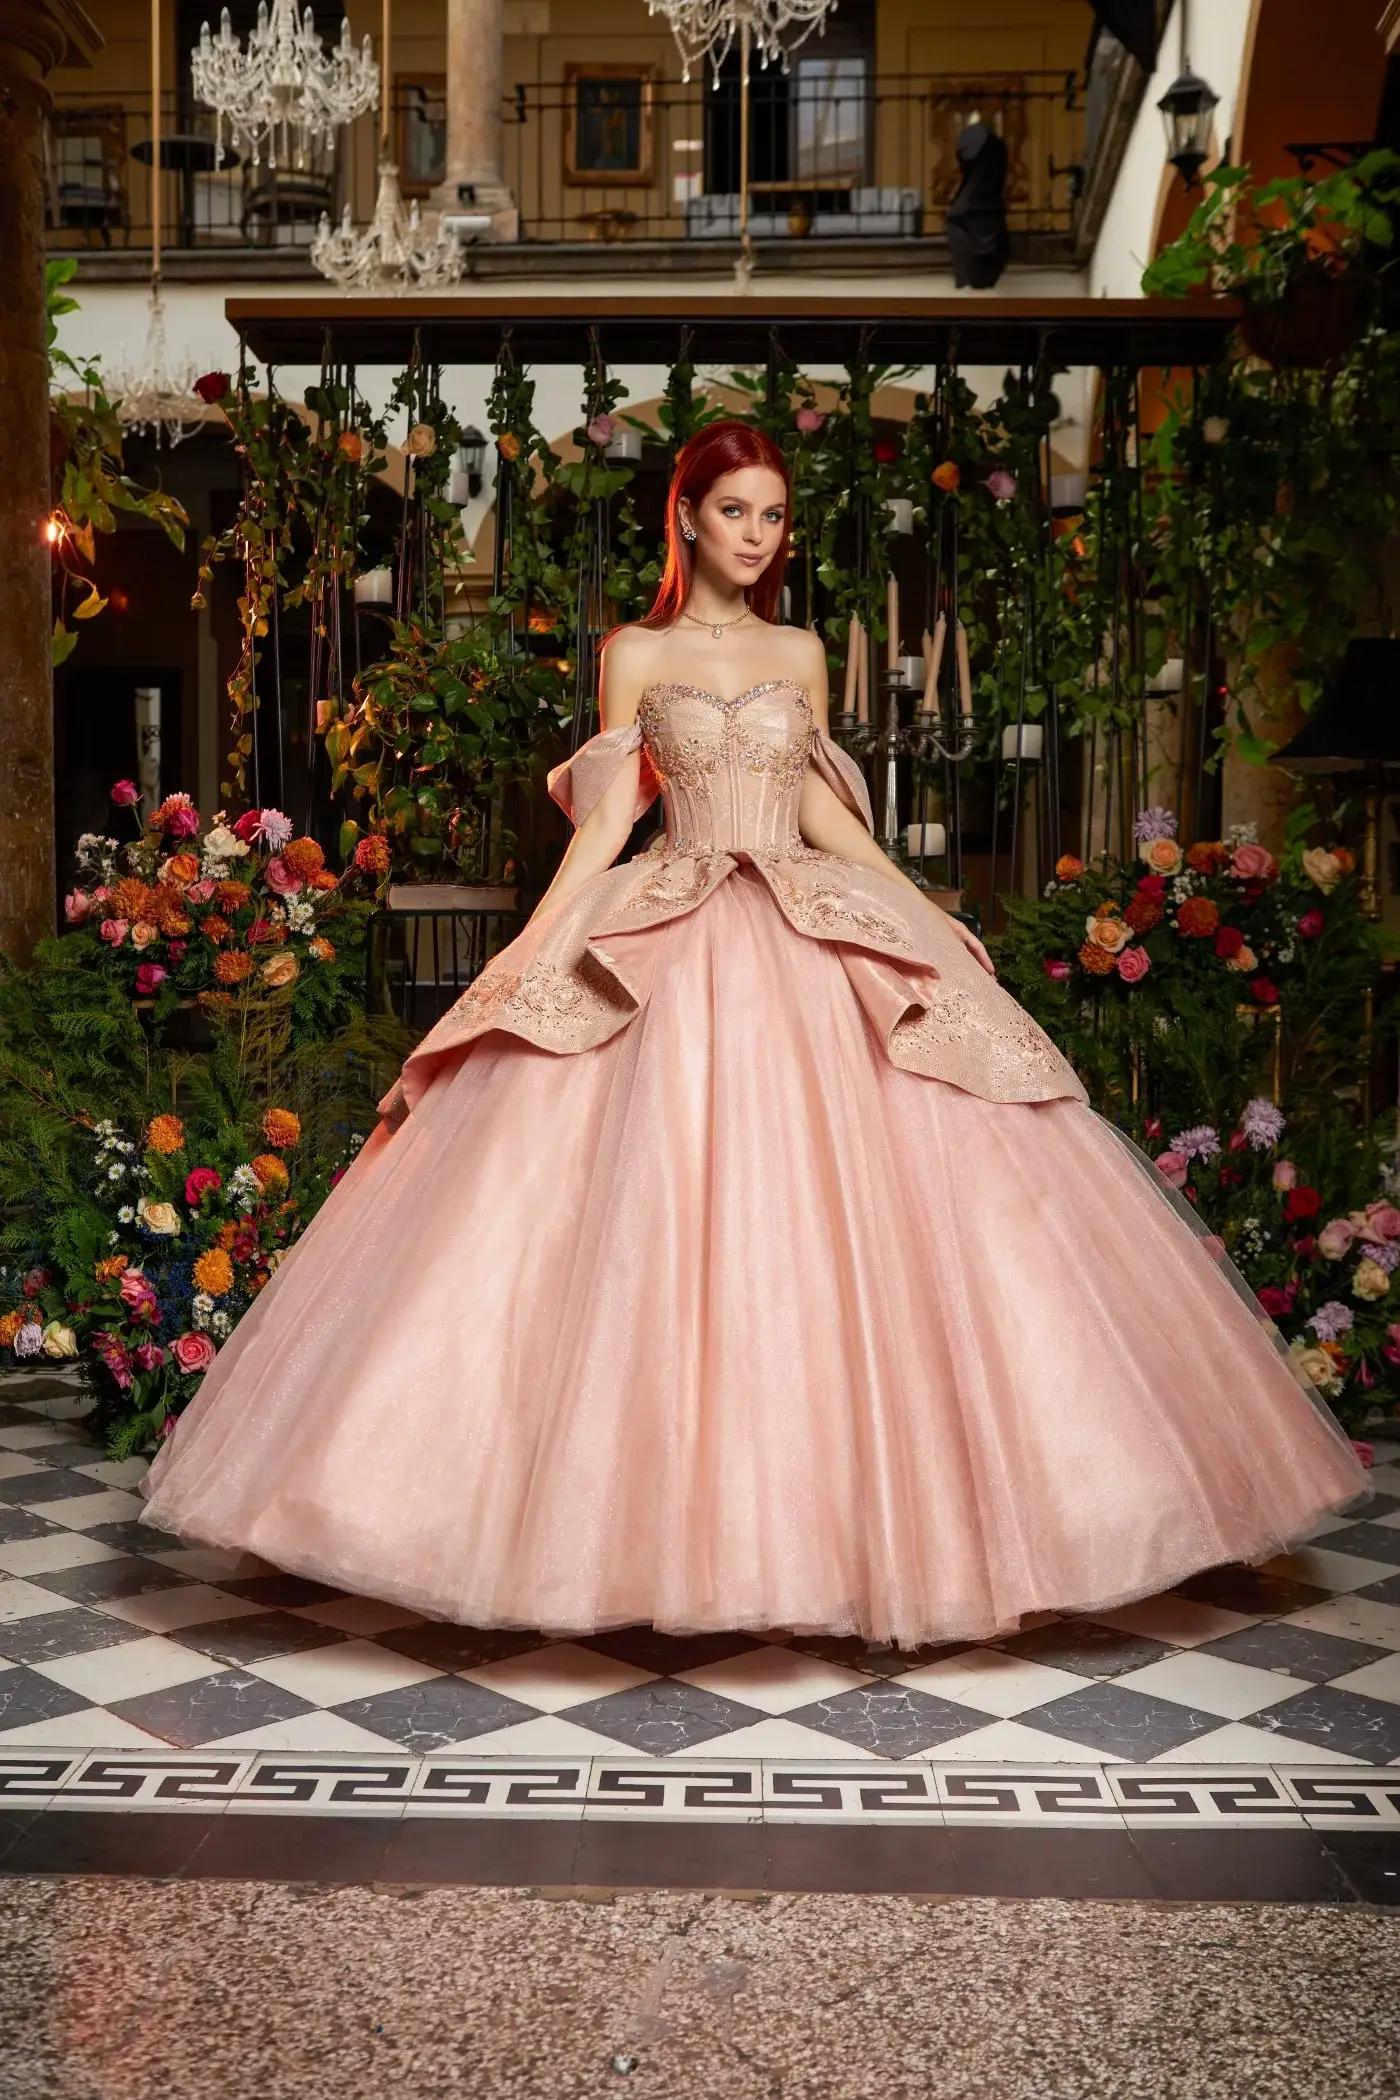 Quinceañera Dress Shopping: How to Make it a Memorable Experience Image